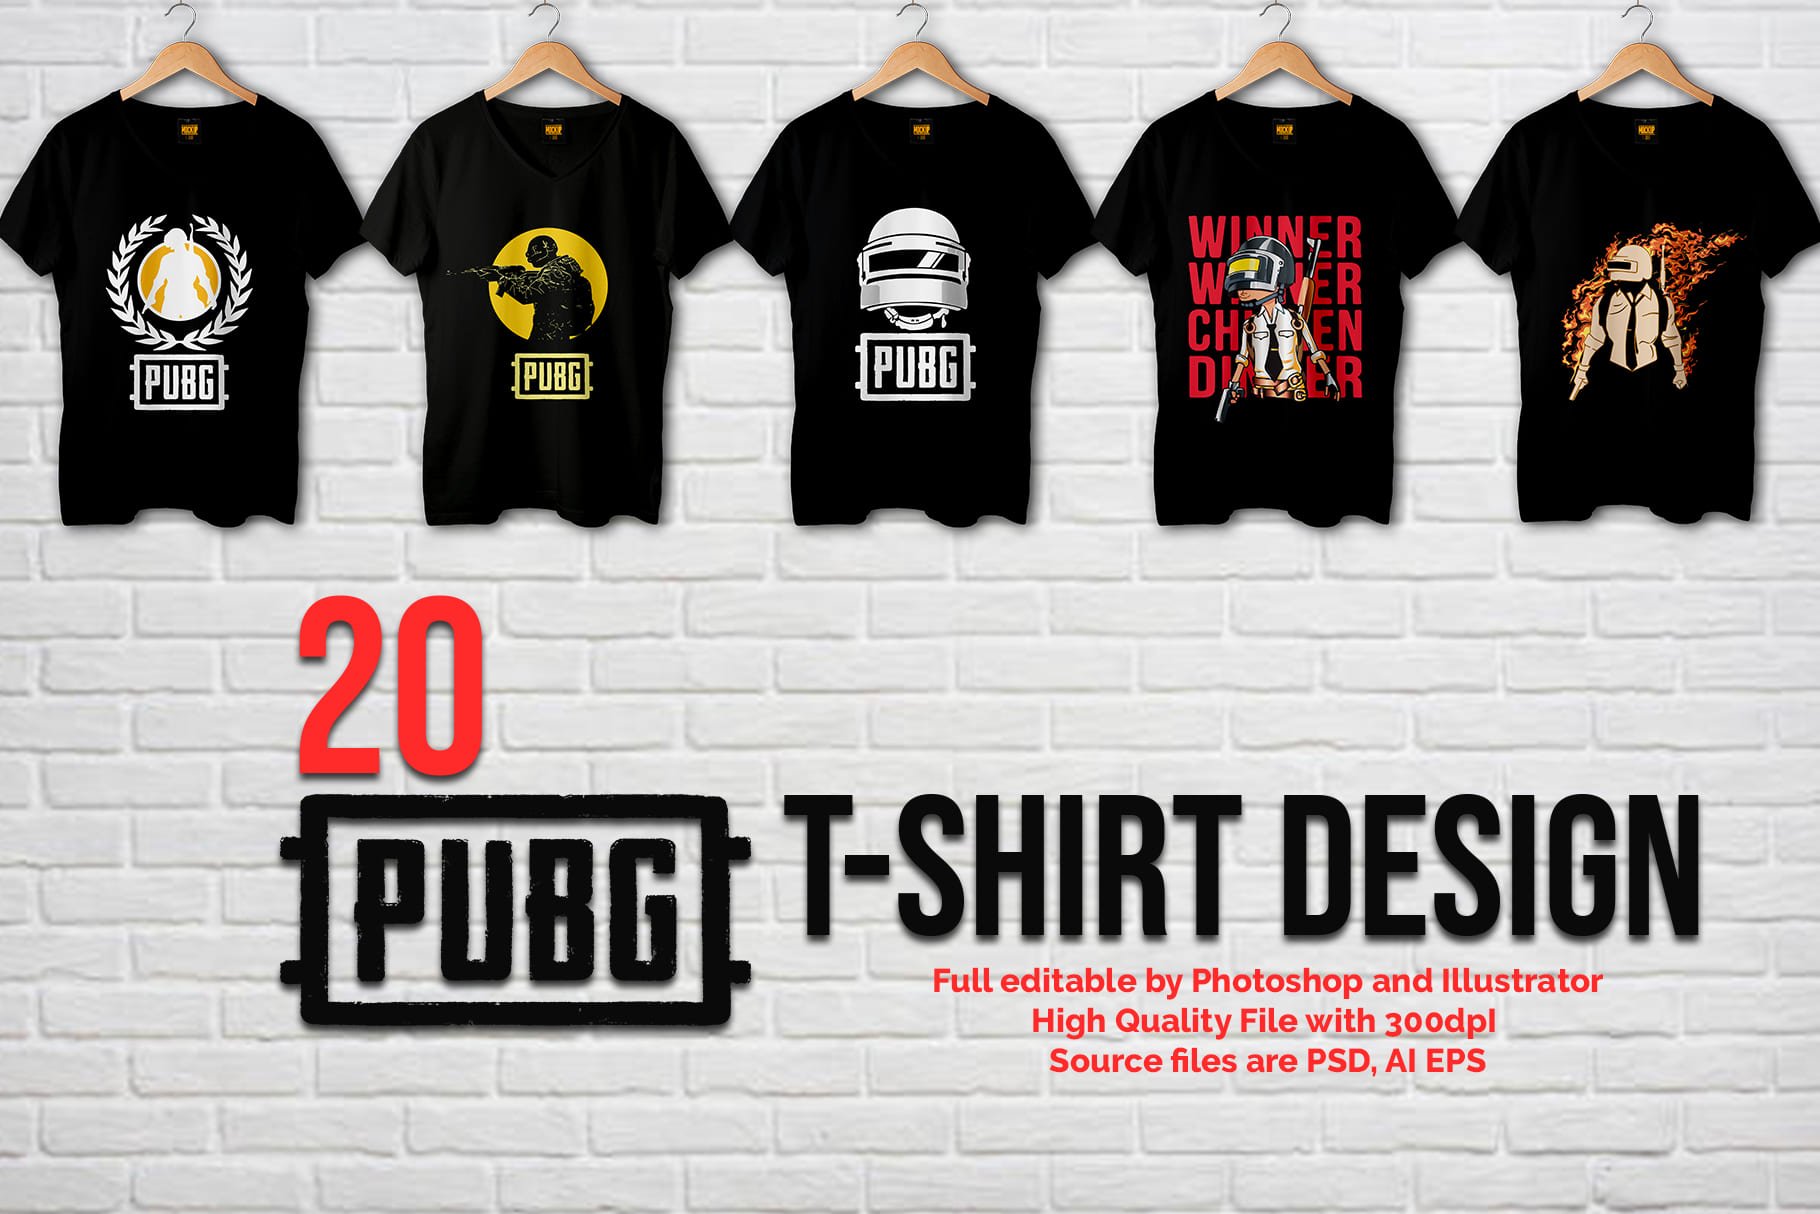 Main image.20+ Pubg T-Shirt design for Man and Woman.